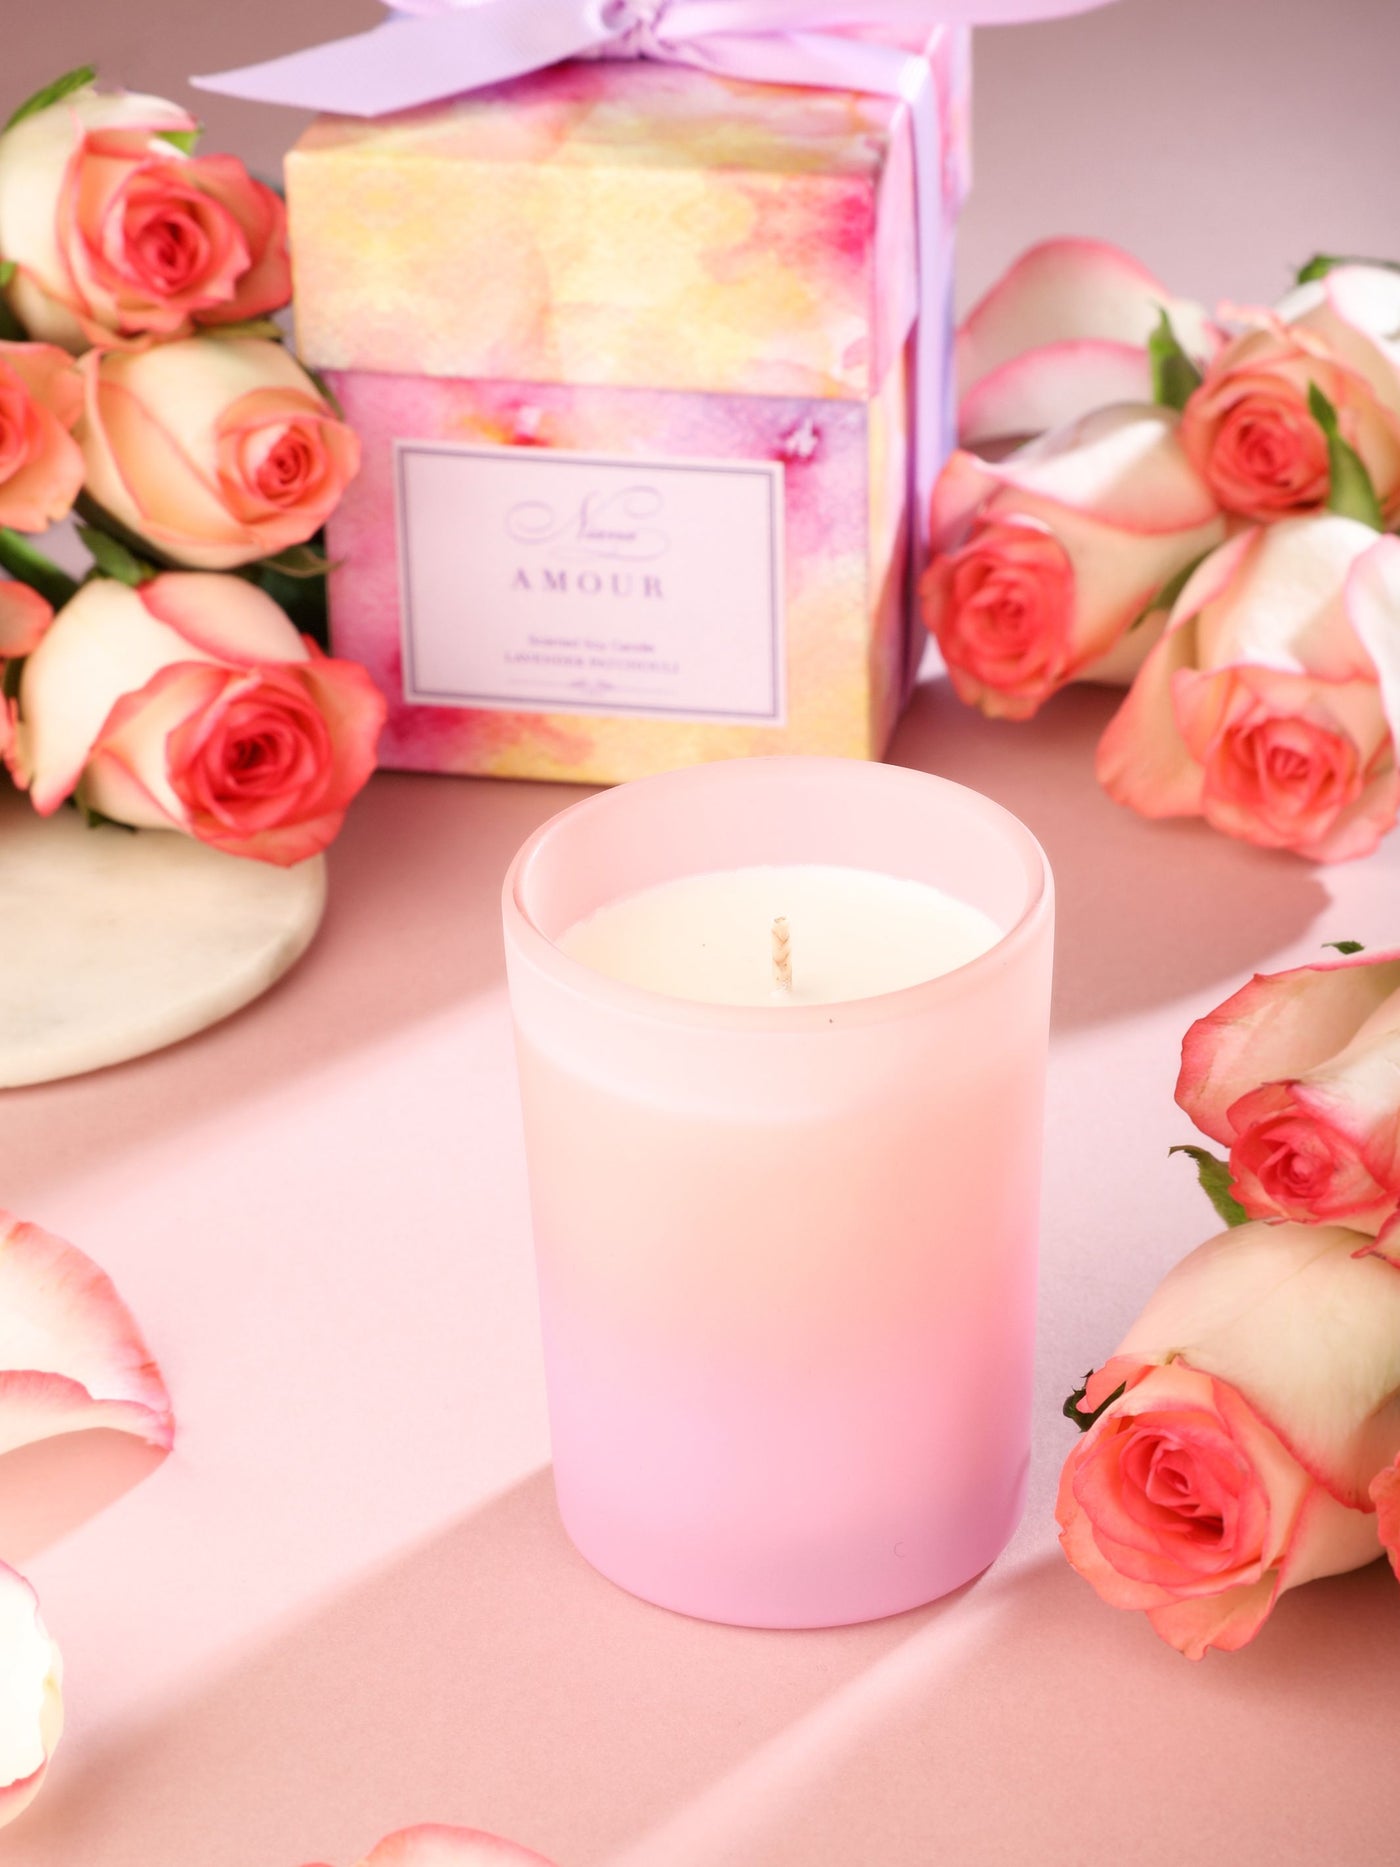 Amour Candle